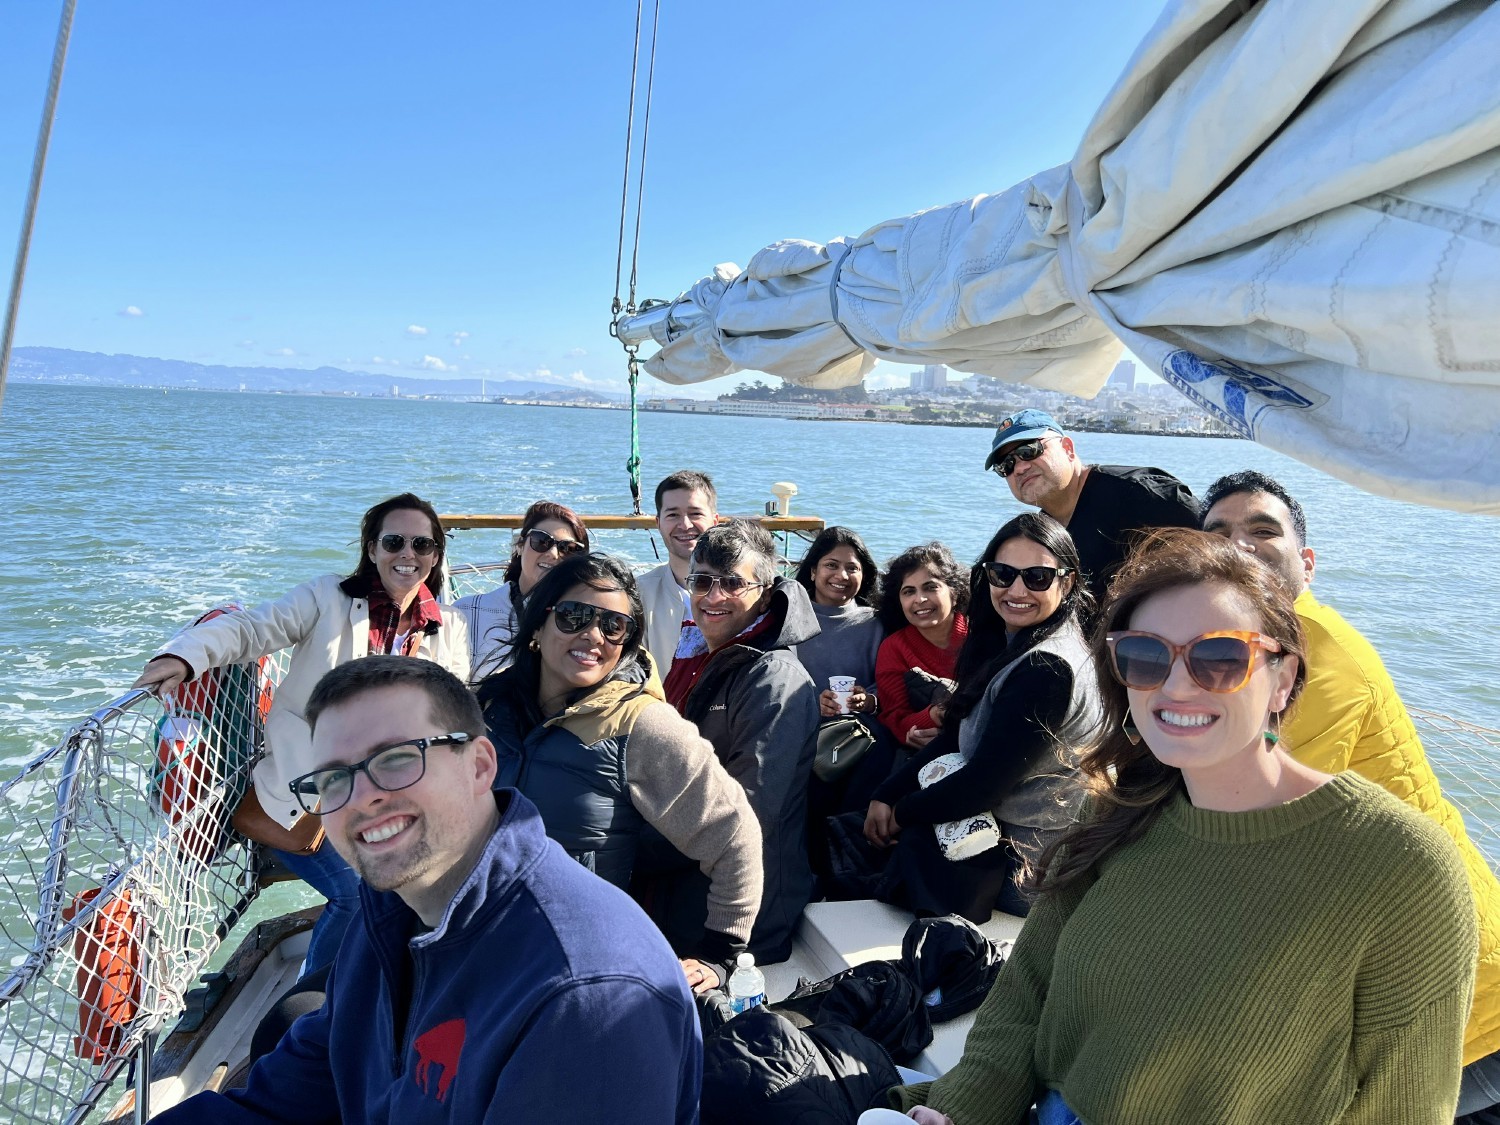 LeadStack team building event in San Francisco Bay!